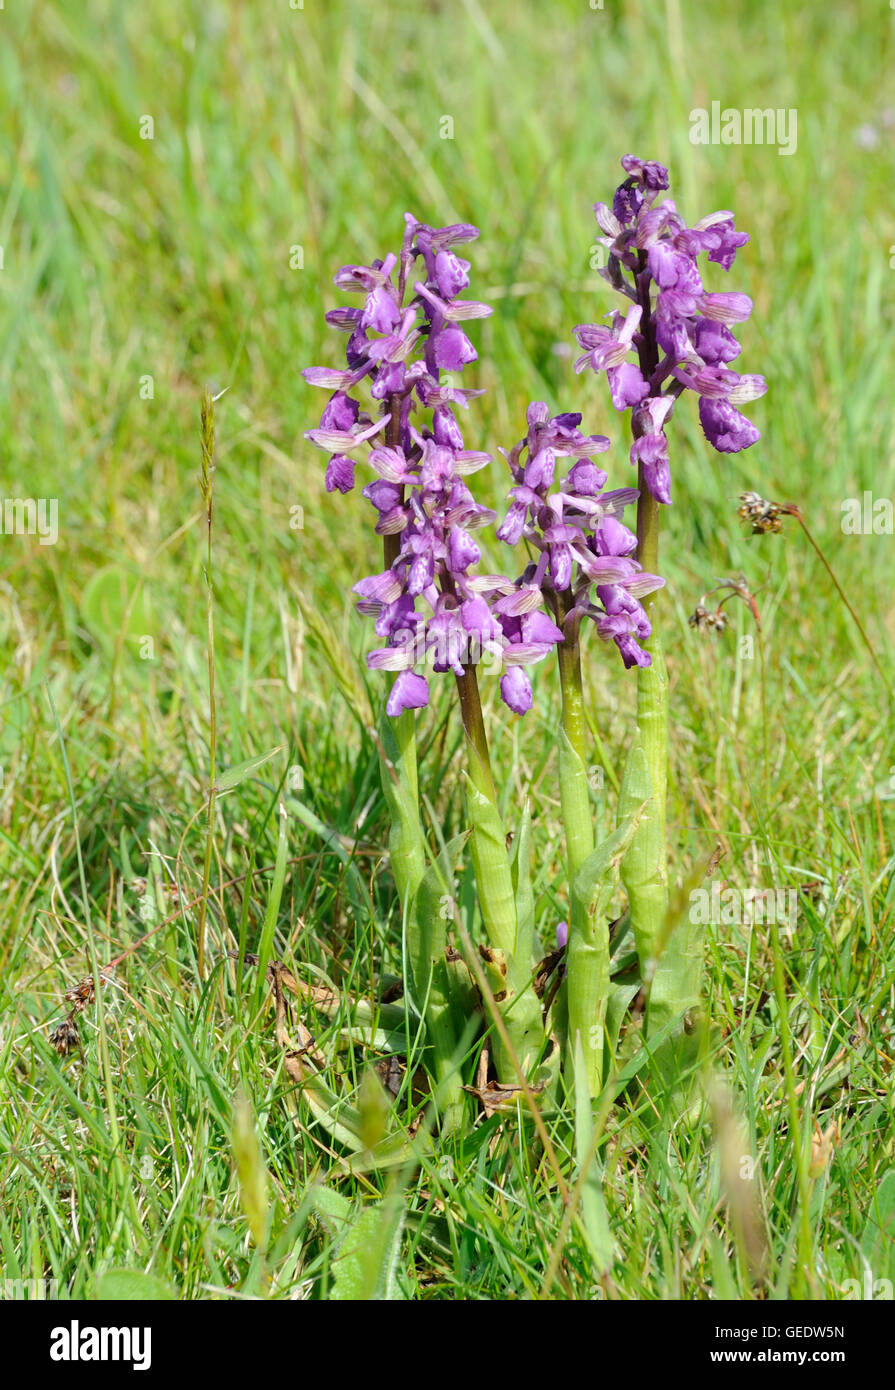 Green-winged or green-veined orchids (Anacamptis morio) Stock Photo